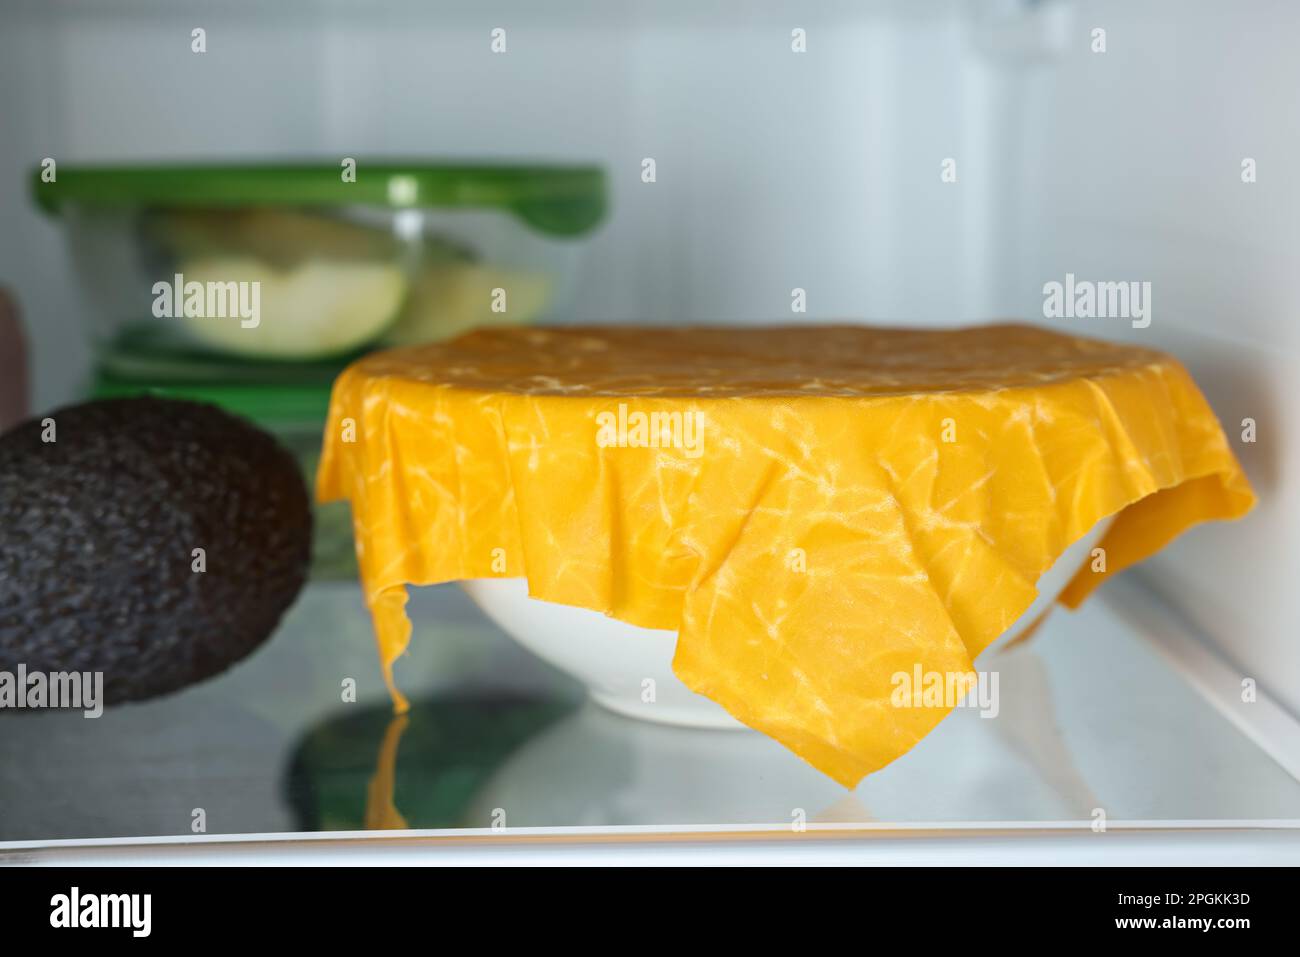 Products packed with beeswax food wrap on refrigerator shelf, closeup Stock Photo